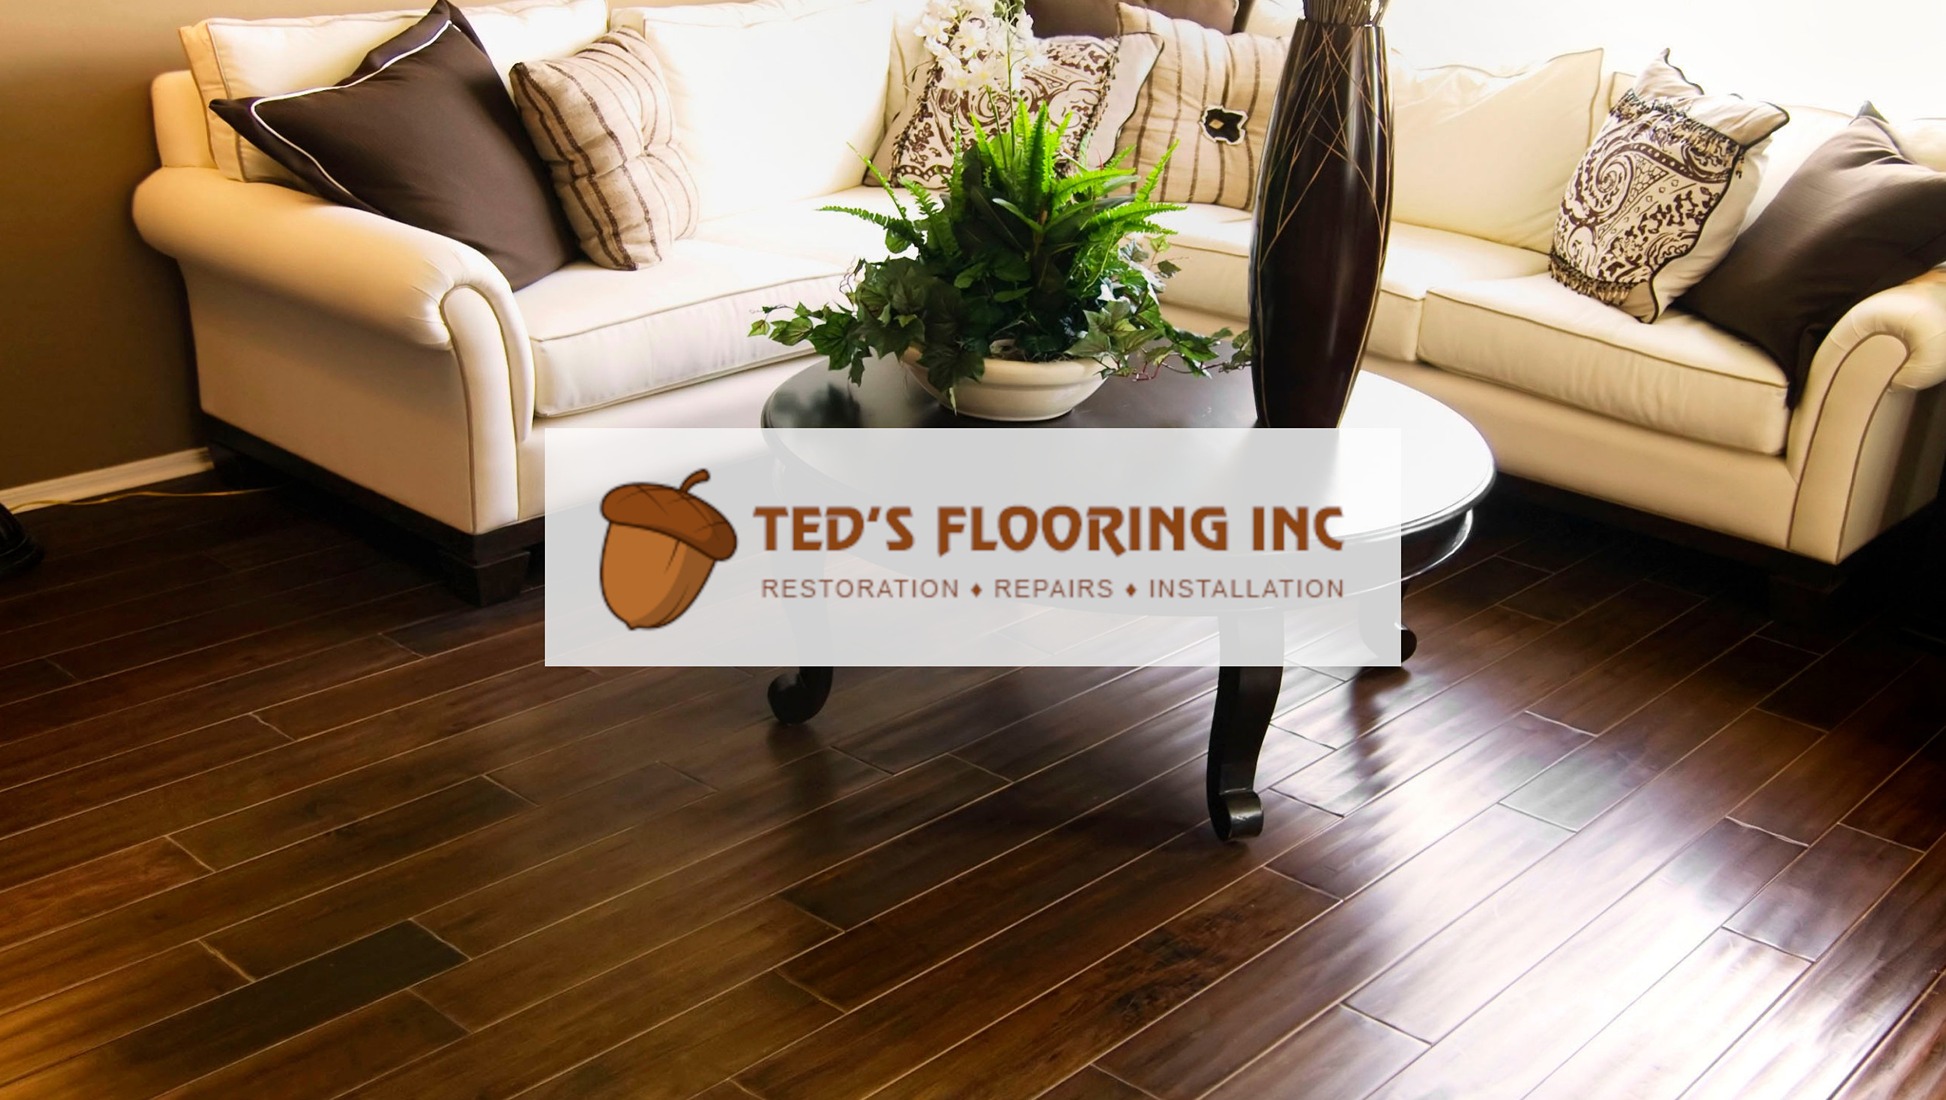 Ted's Flooring